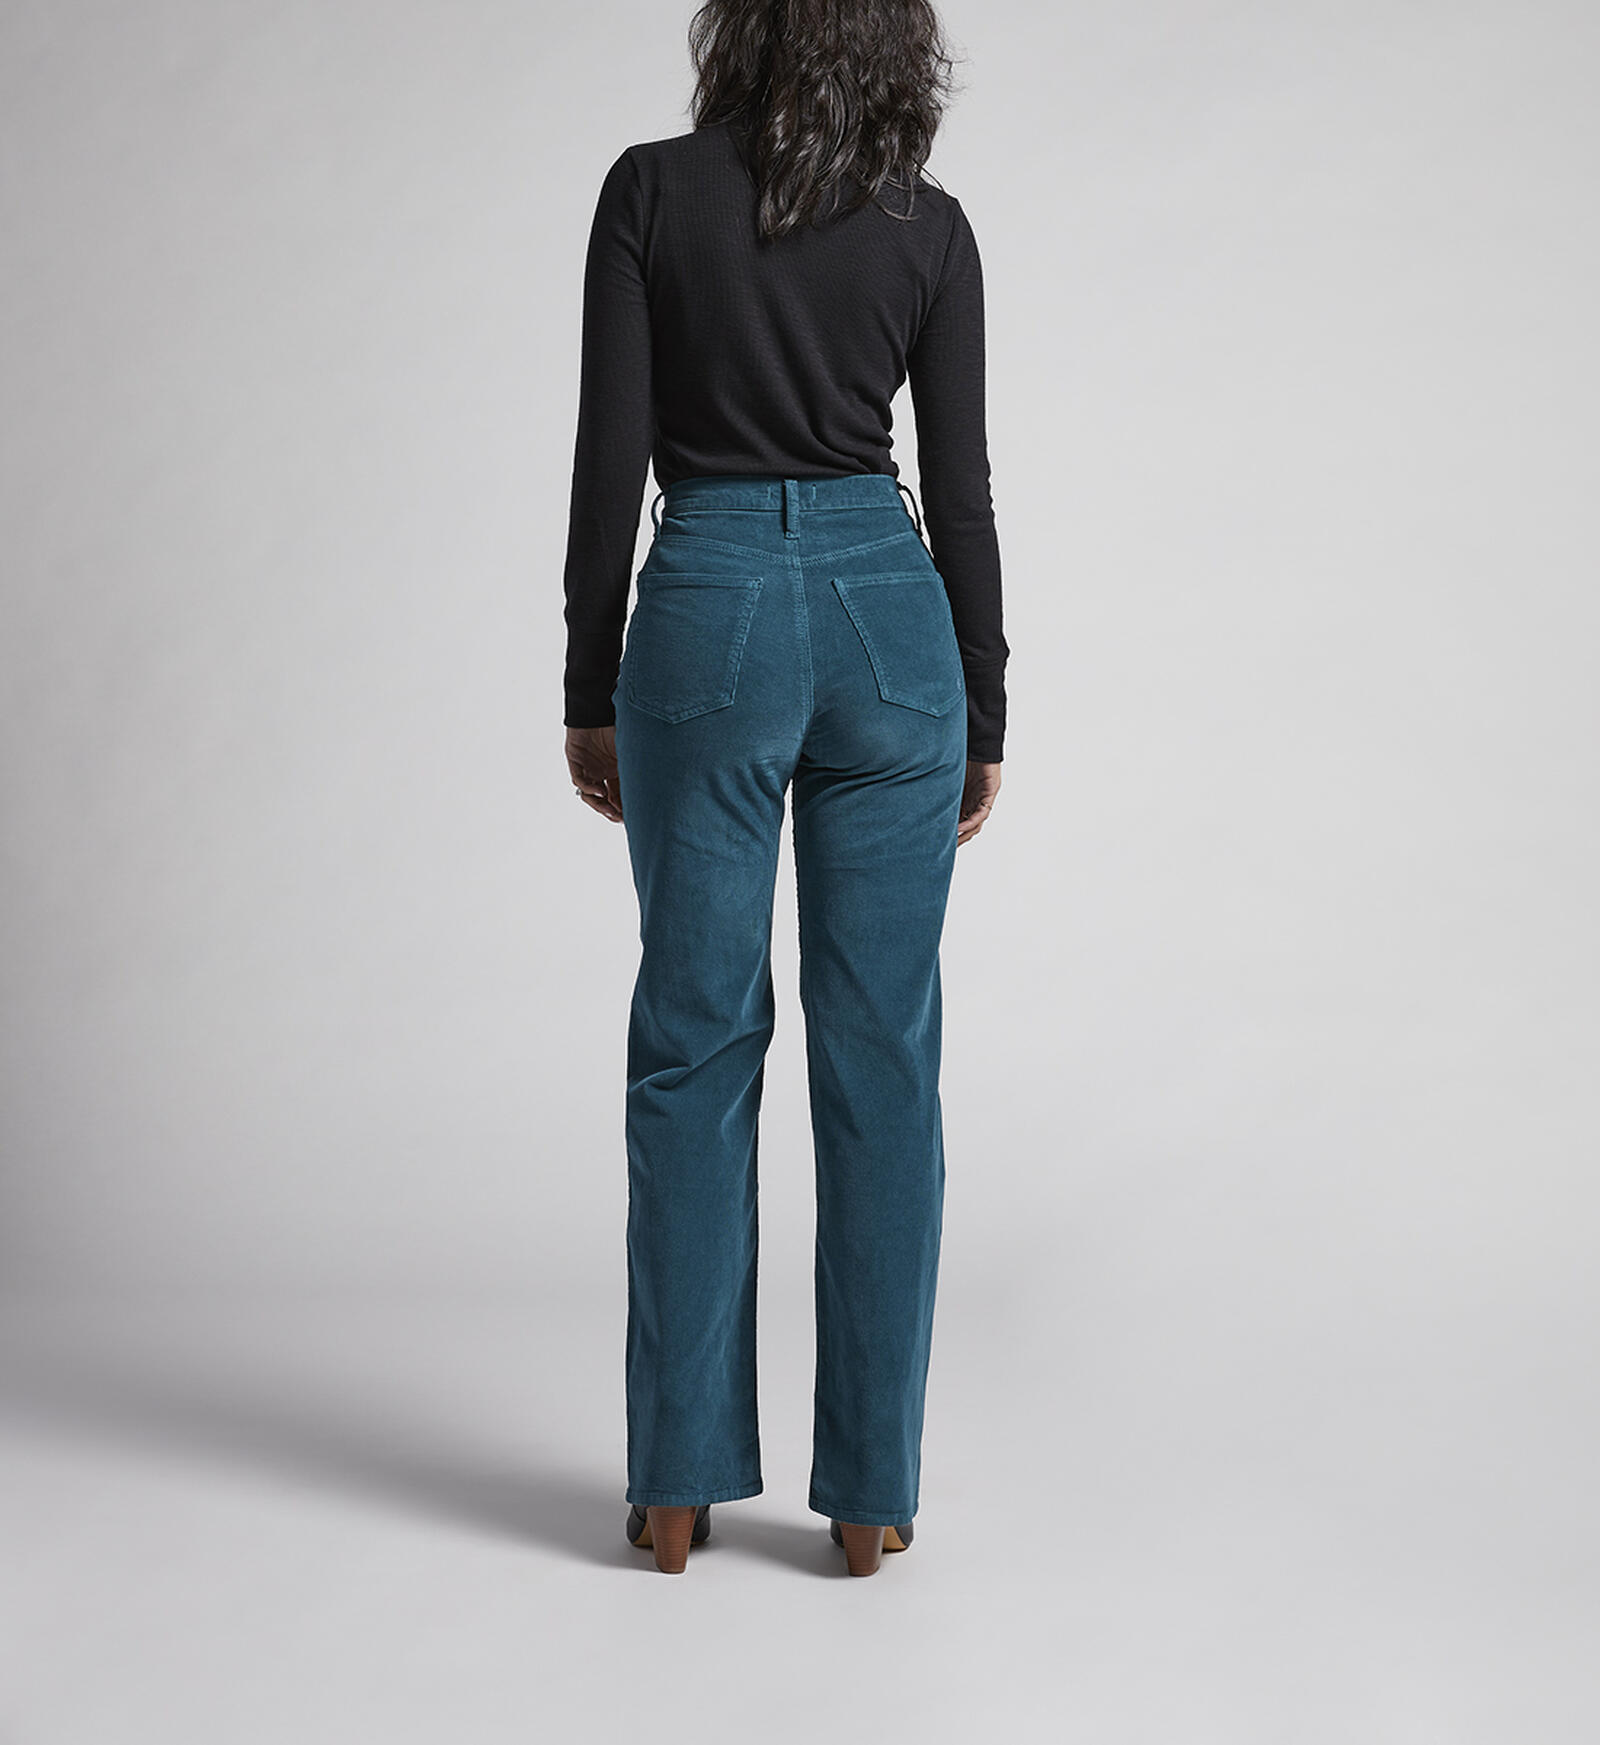 High Rise Corduroy Pants for Women Flare Pull On Plus Size Slim